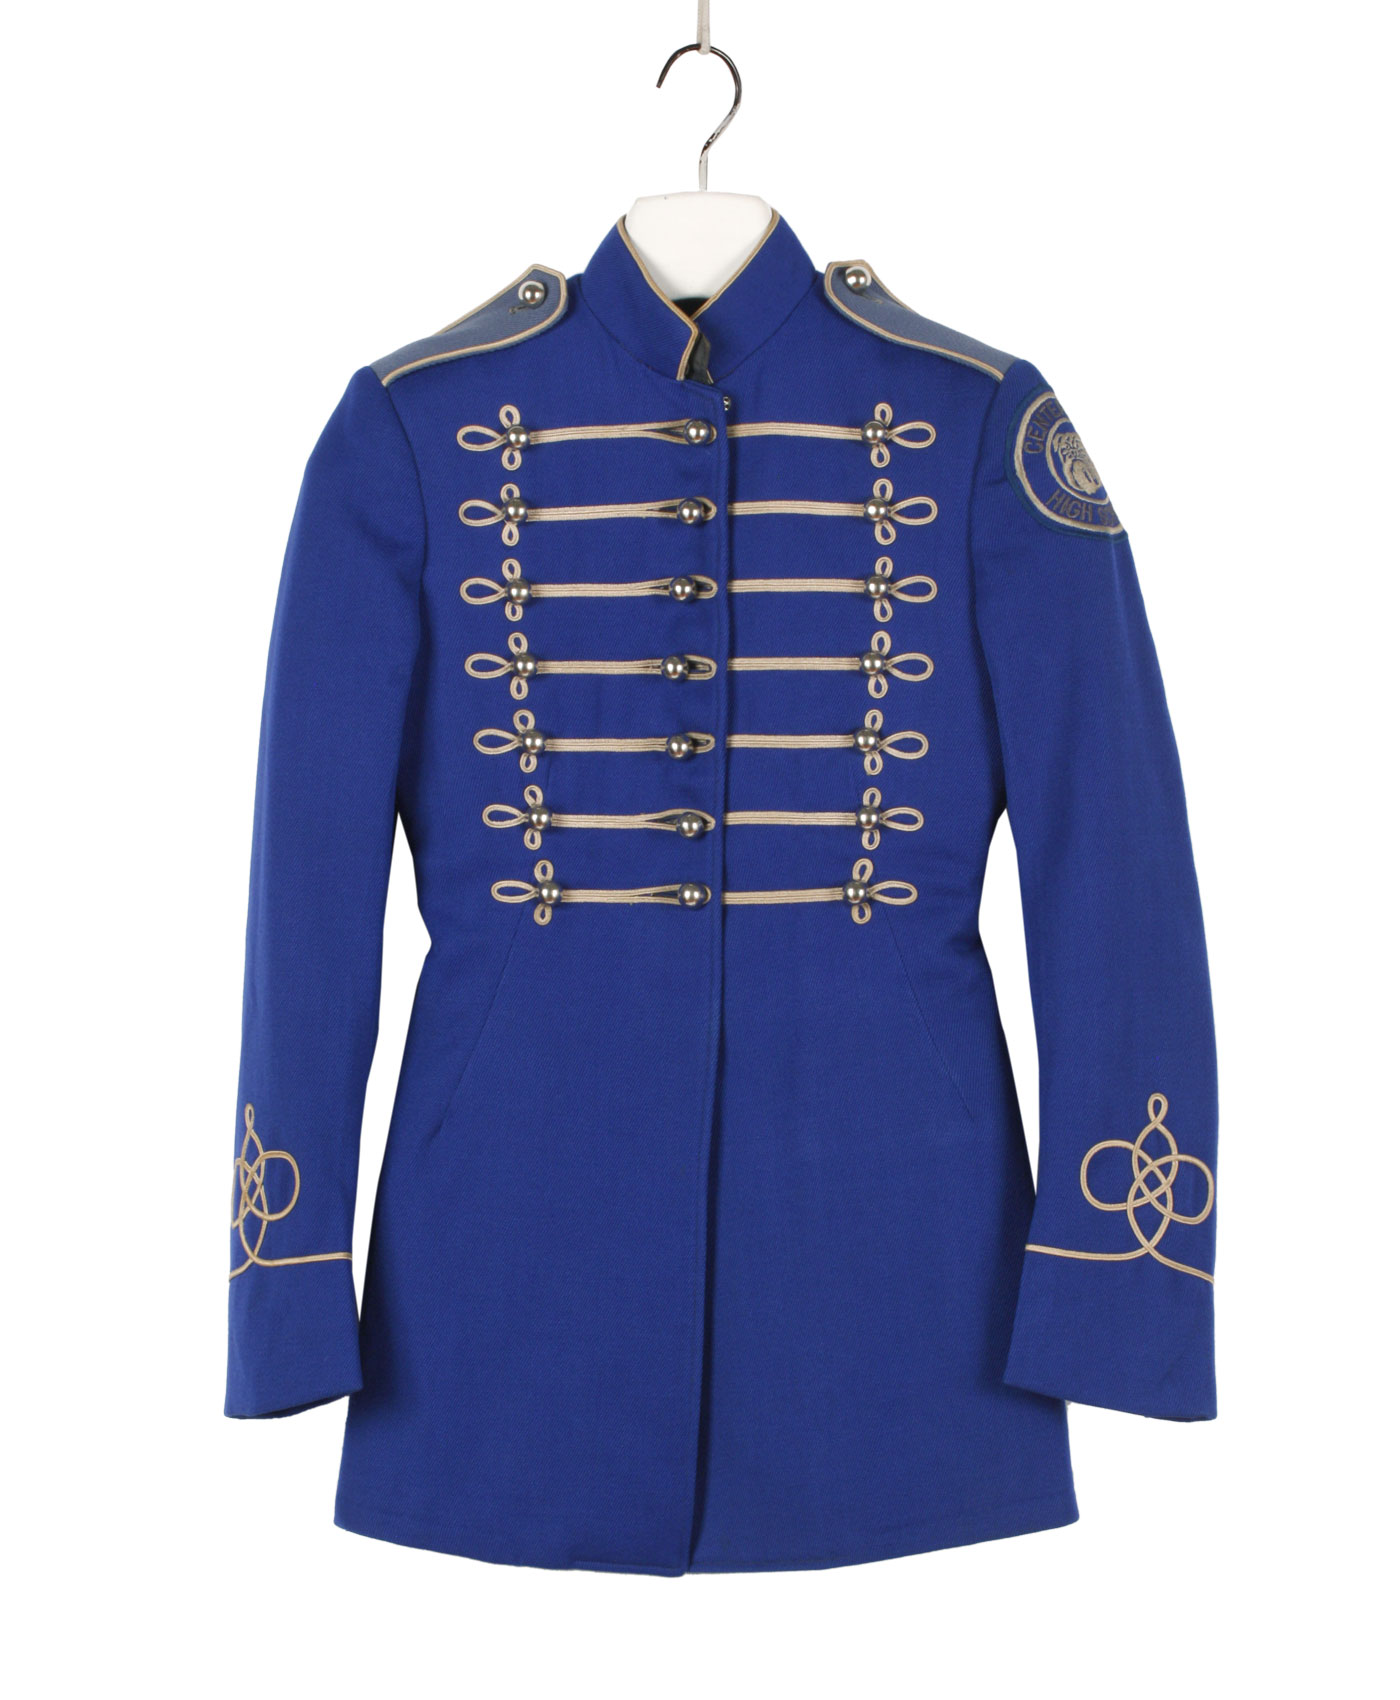 Vintage Marching Band or Military Jacket